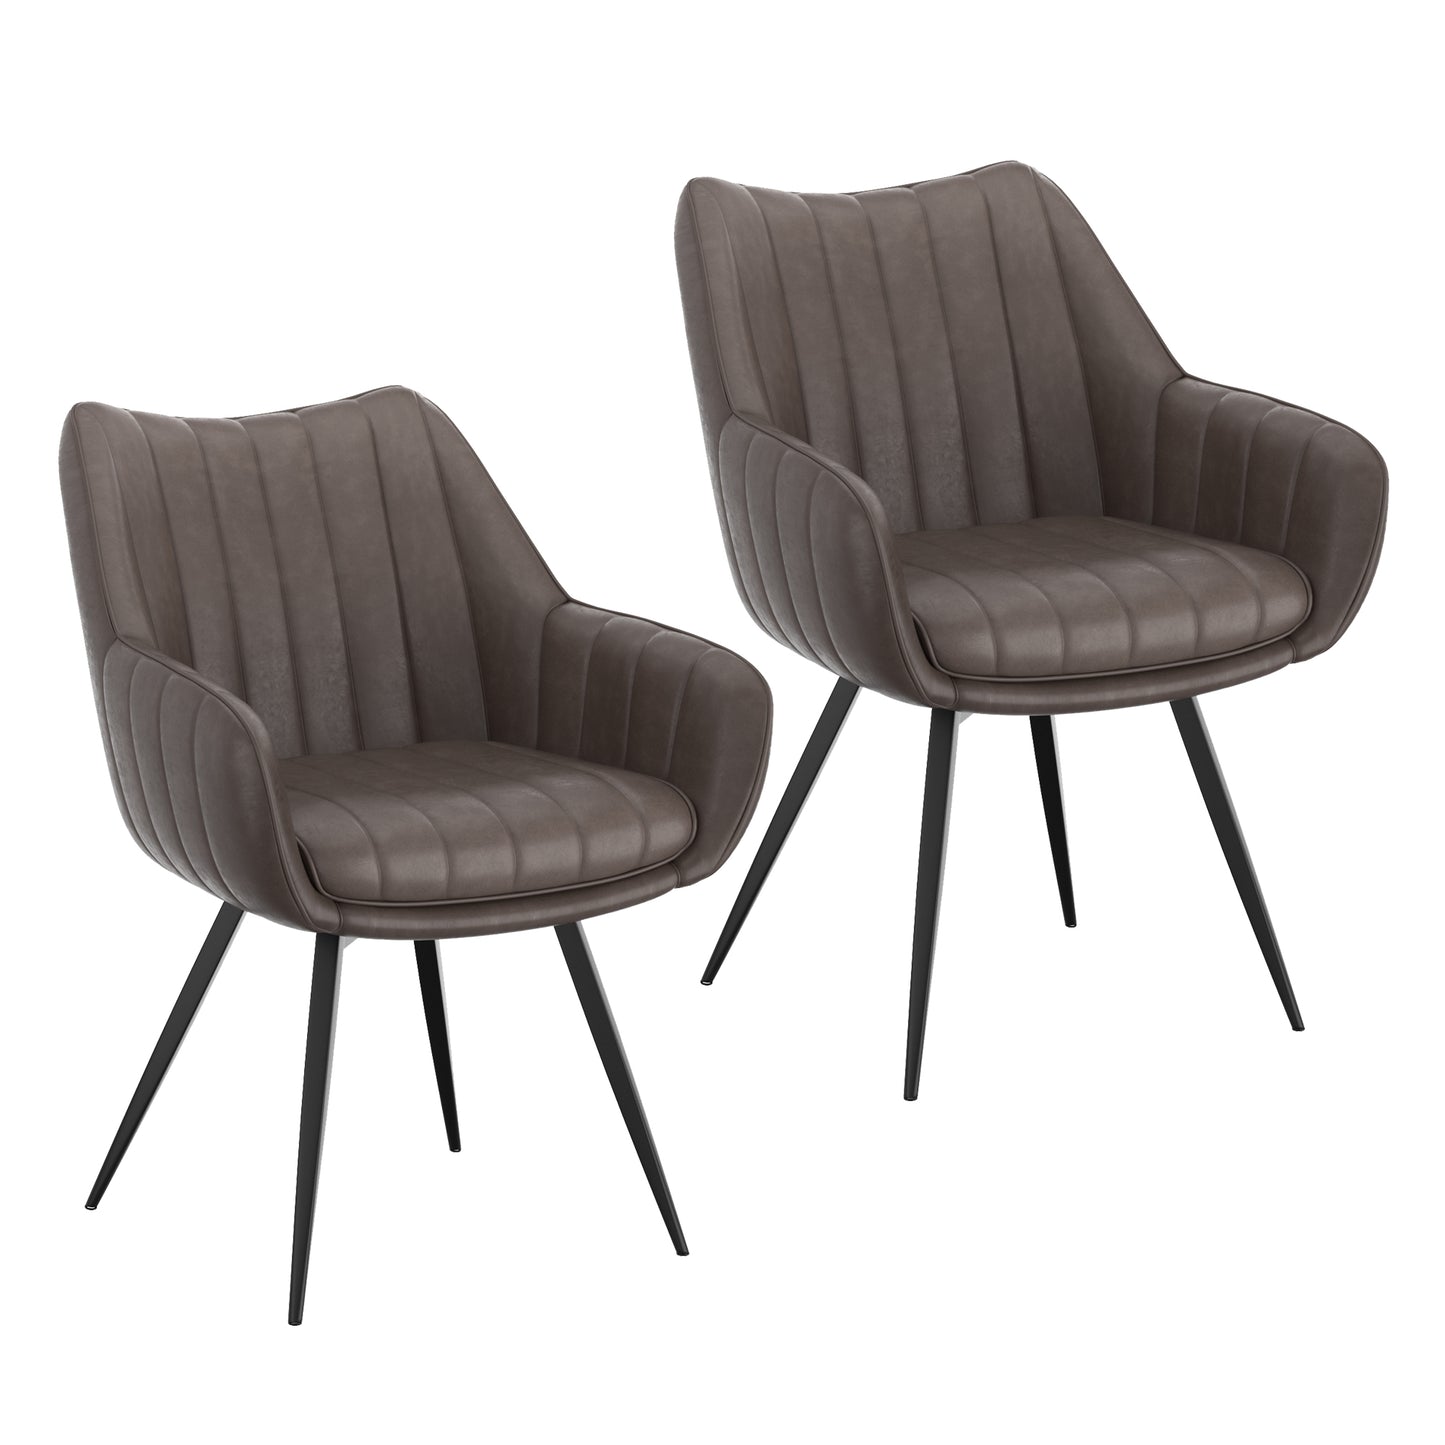 Talon Swivel Dining and Accent Chair, set of 2, in Charcoal and Black